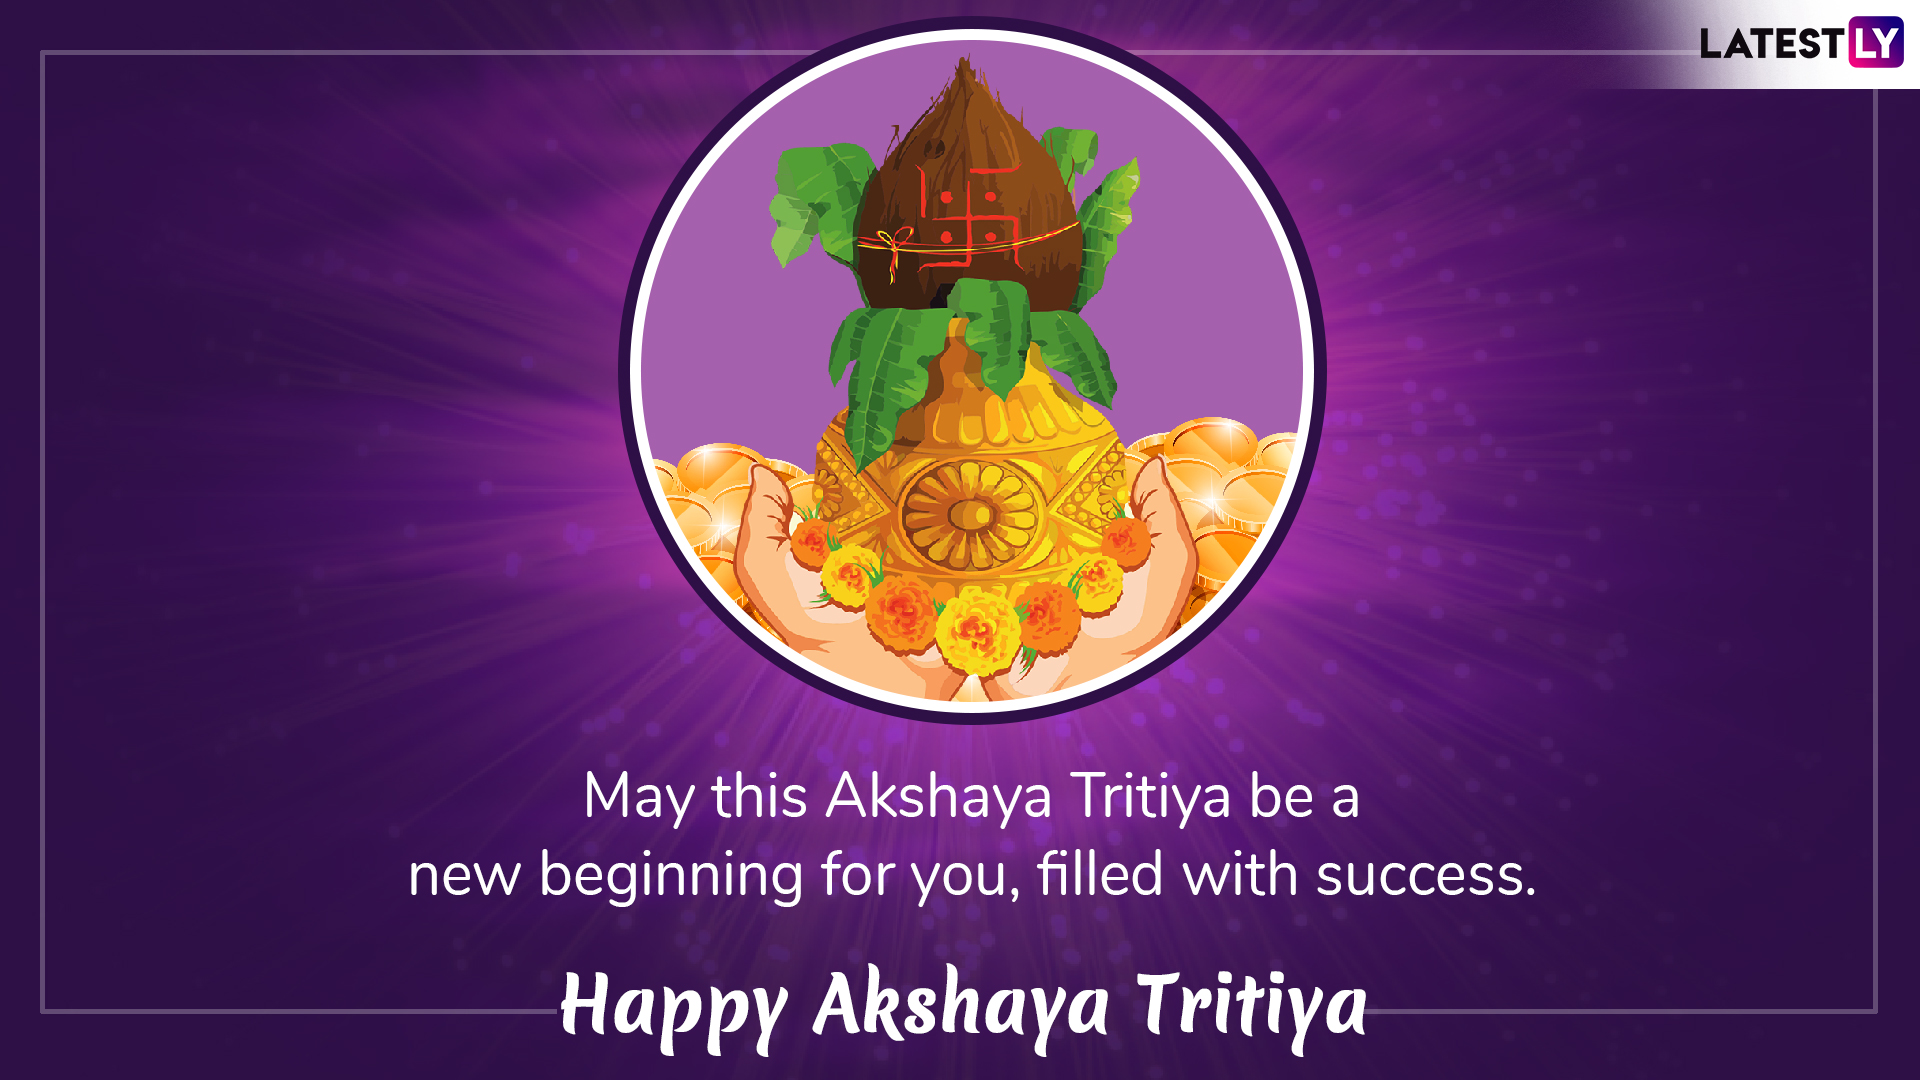 Akshaya Tritiya Festival With A Golden Kalash, Religious, Wallpaper,  Advertisement PNG and Vector with Transparent Background for Free Download